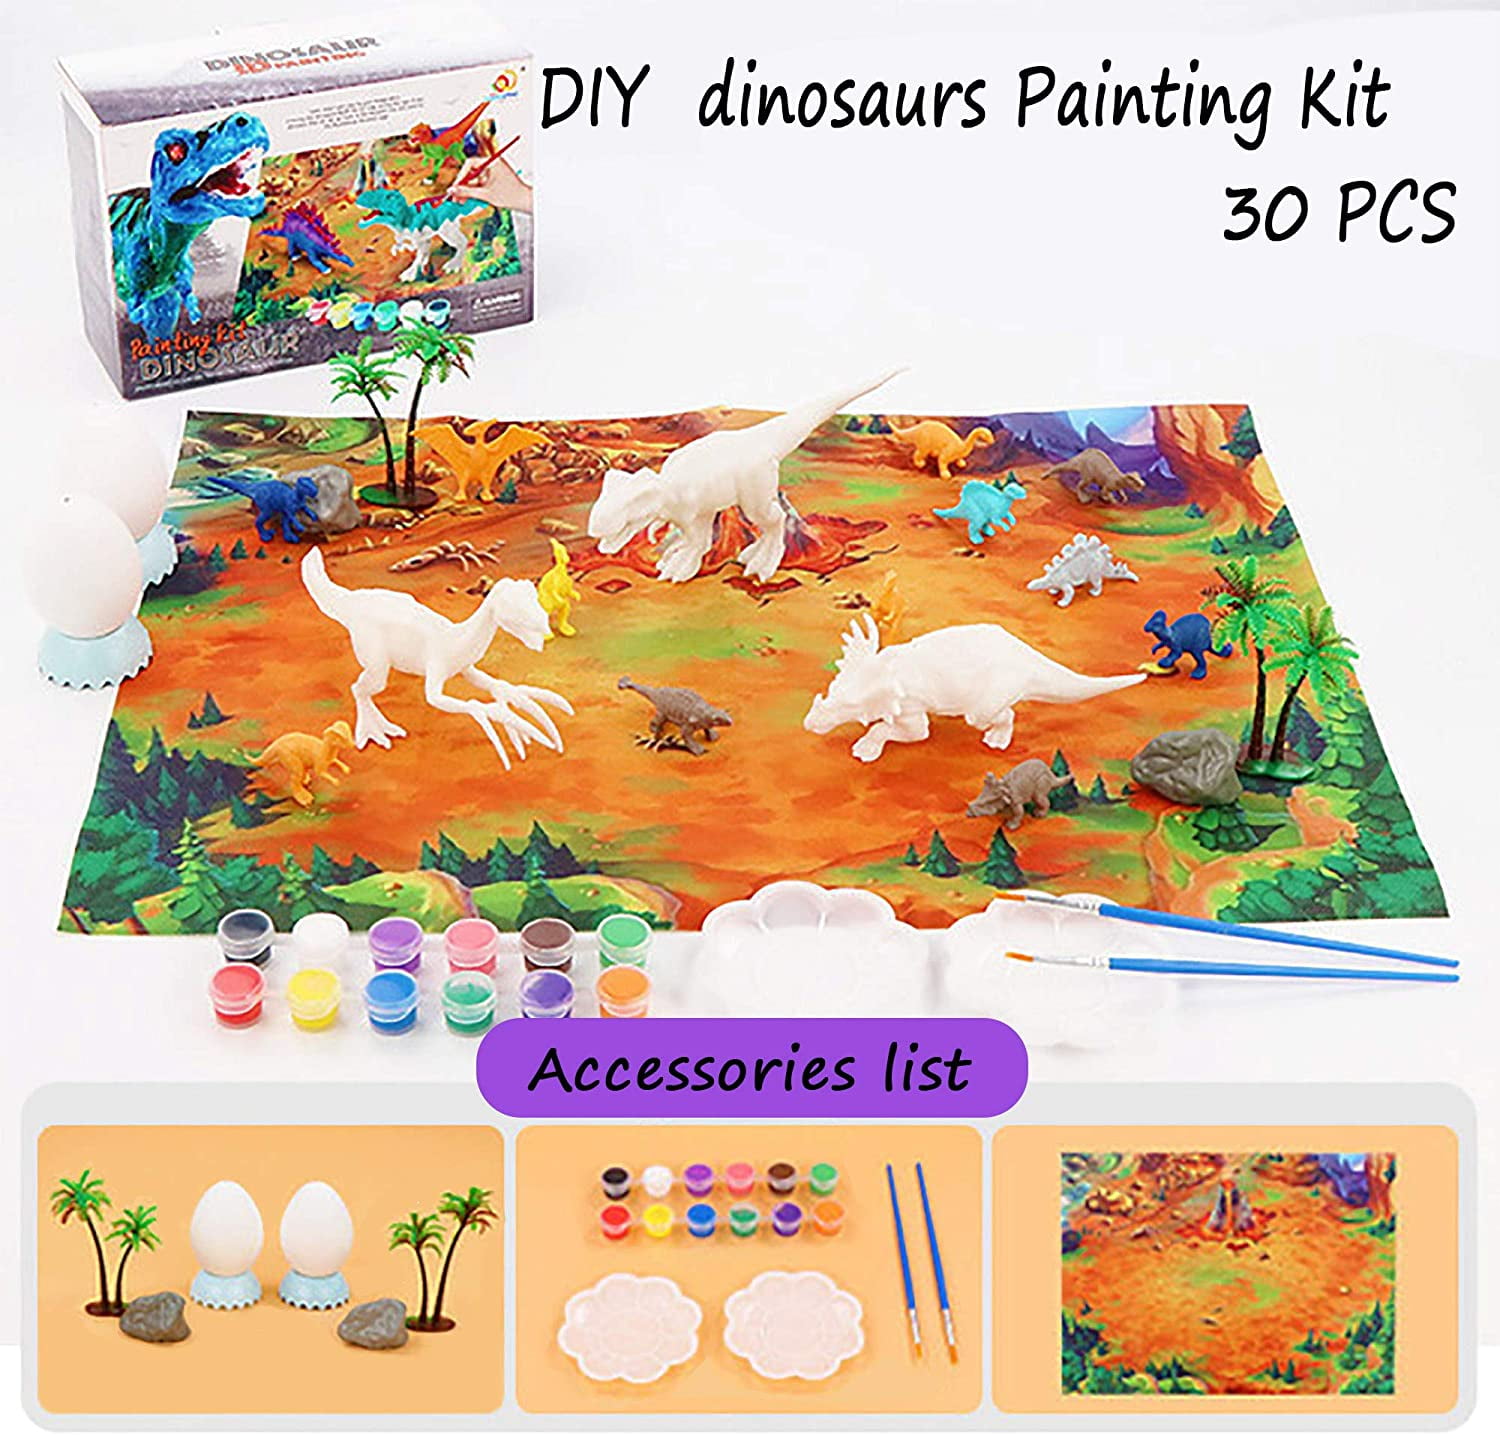 Party Favors Fun DIY Crafts for Boys Girls Kids Activities Supplies Toddler Creativity Project Yileqi Create Your Own Dinosaur Art Kit Toy Arts and Crafts Kit for Kids Age 3 4 5 6 7 8 Years Old 